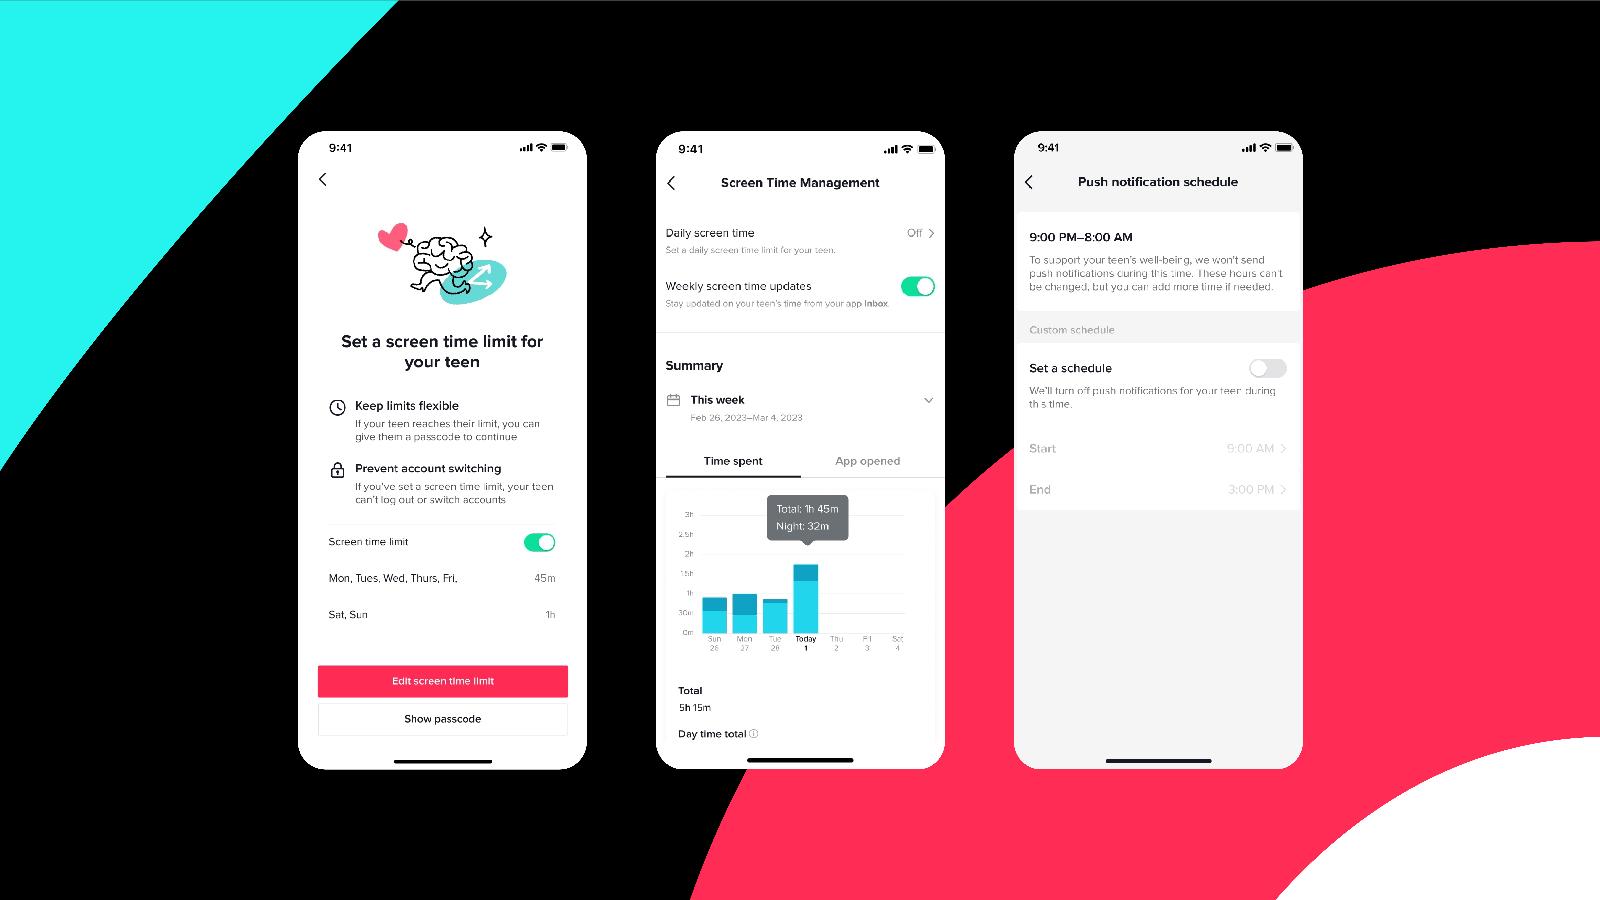 TikTok rolls out new screen time controls, adds new default settings for teens and expands Family Pairing